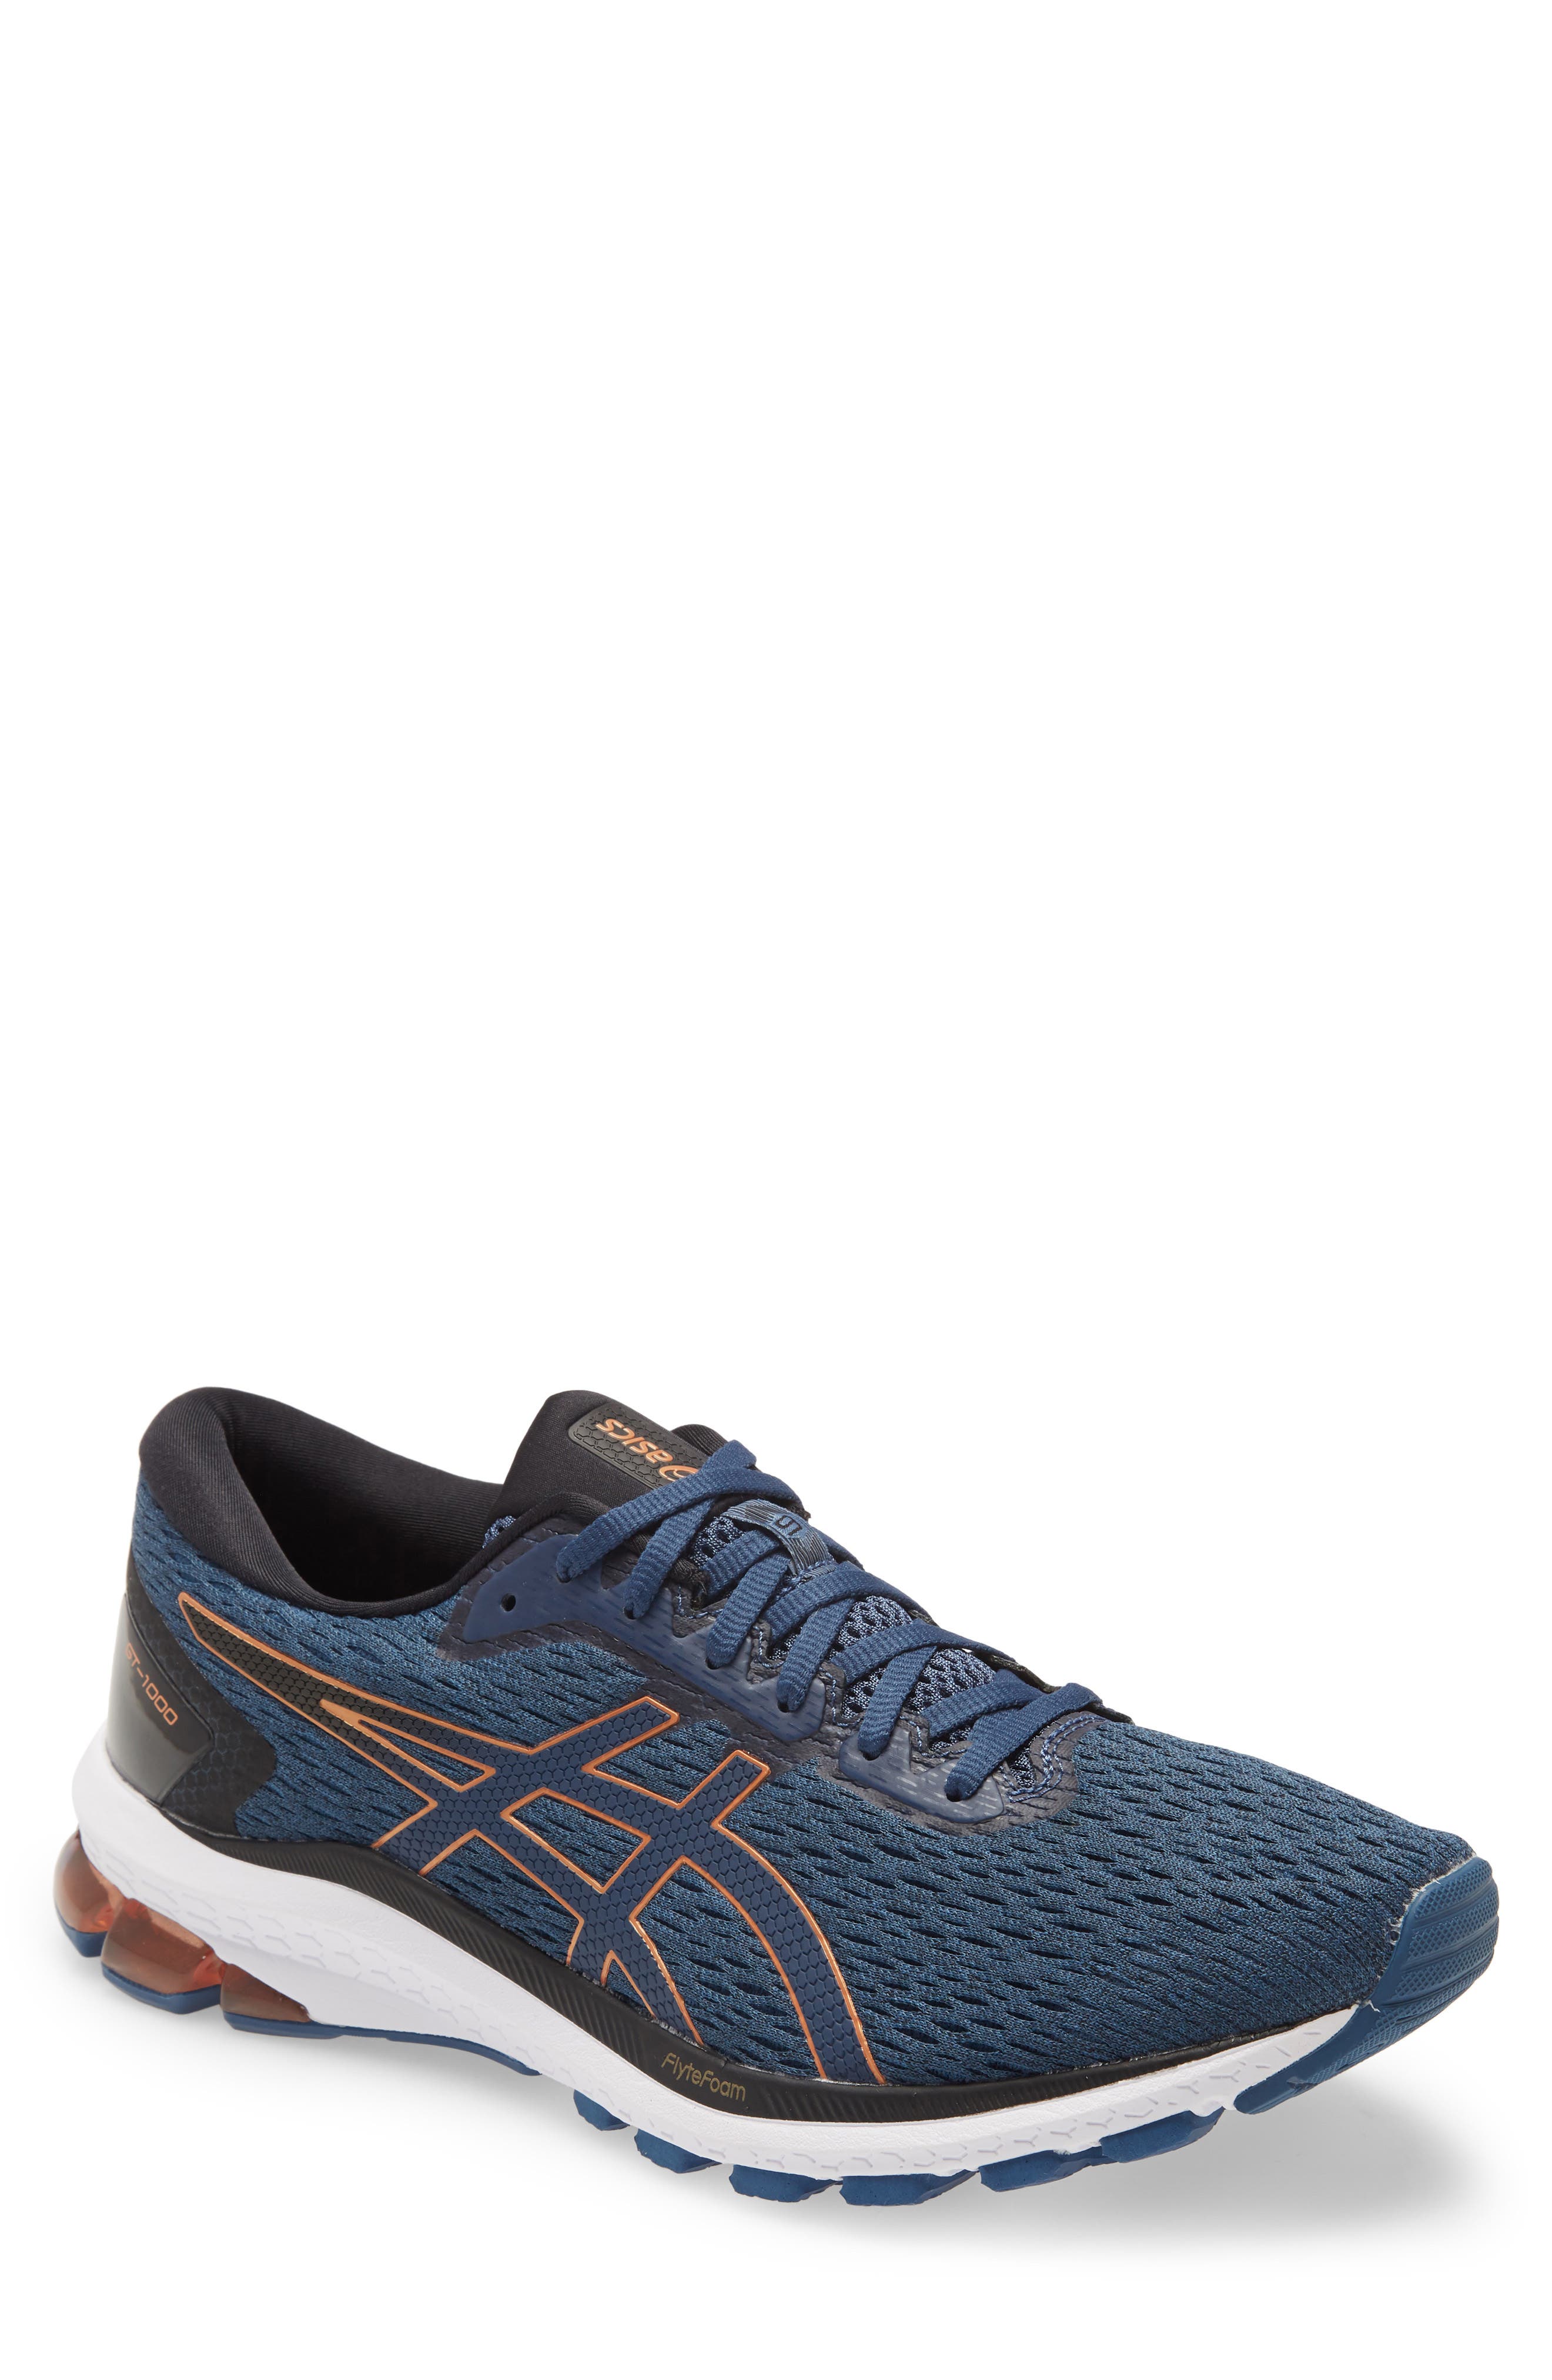 where to buy asics shoes near me